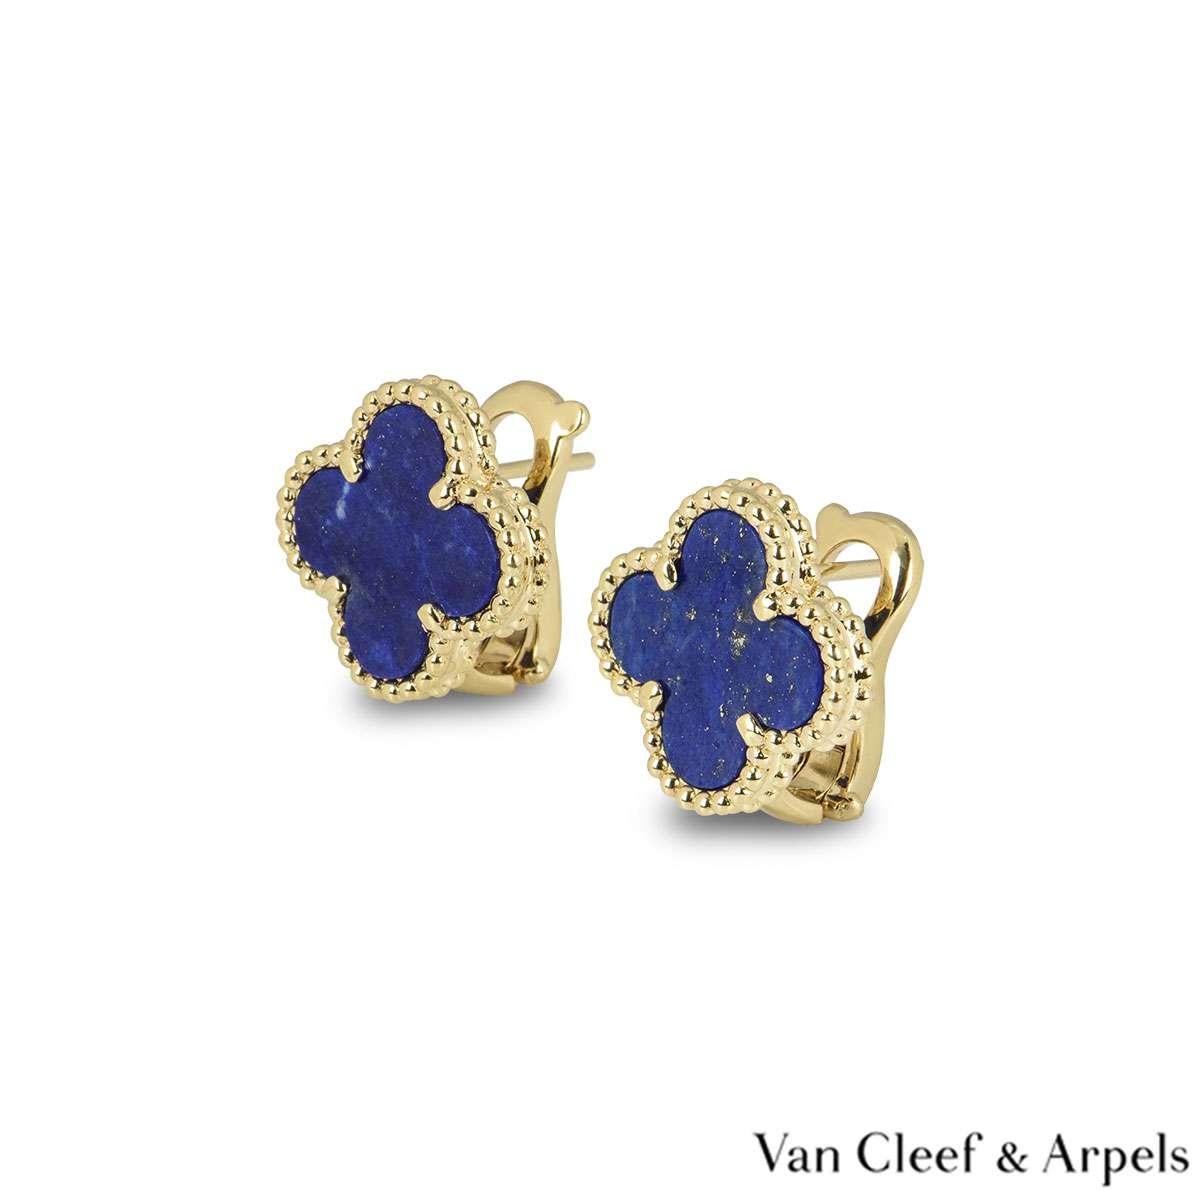 A beautiful pair of 18k yellow gold Van Cleef & Arpels earrings from the Sweet Alhambra collection. The earrings are composed of a four leaf clover motif with a lapis lazuli insert set to the centre, complimented by a beaded edge. The earrings